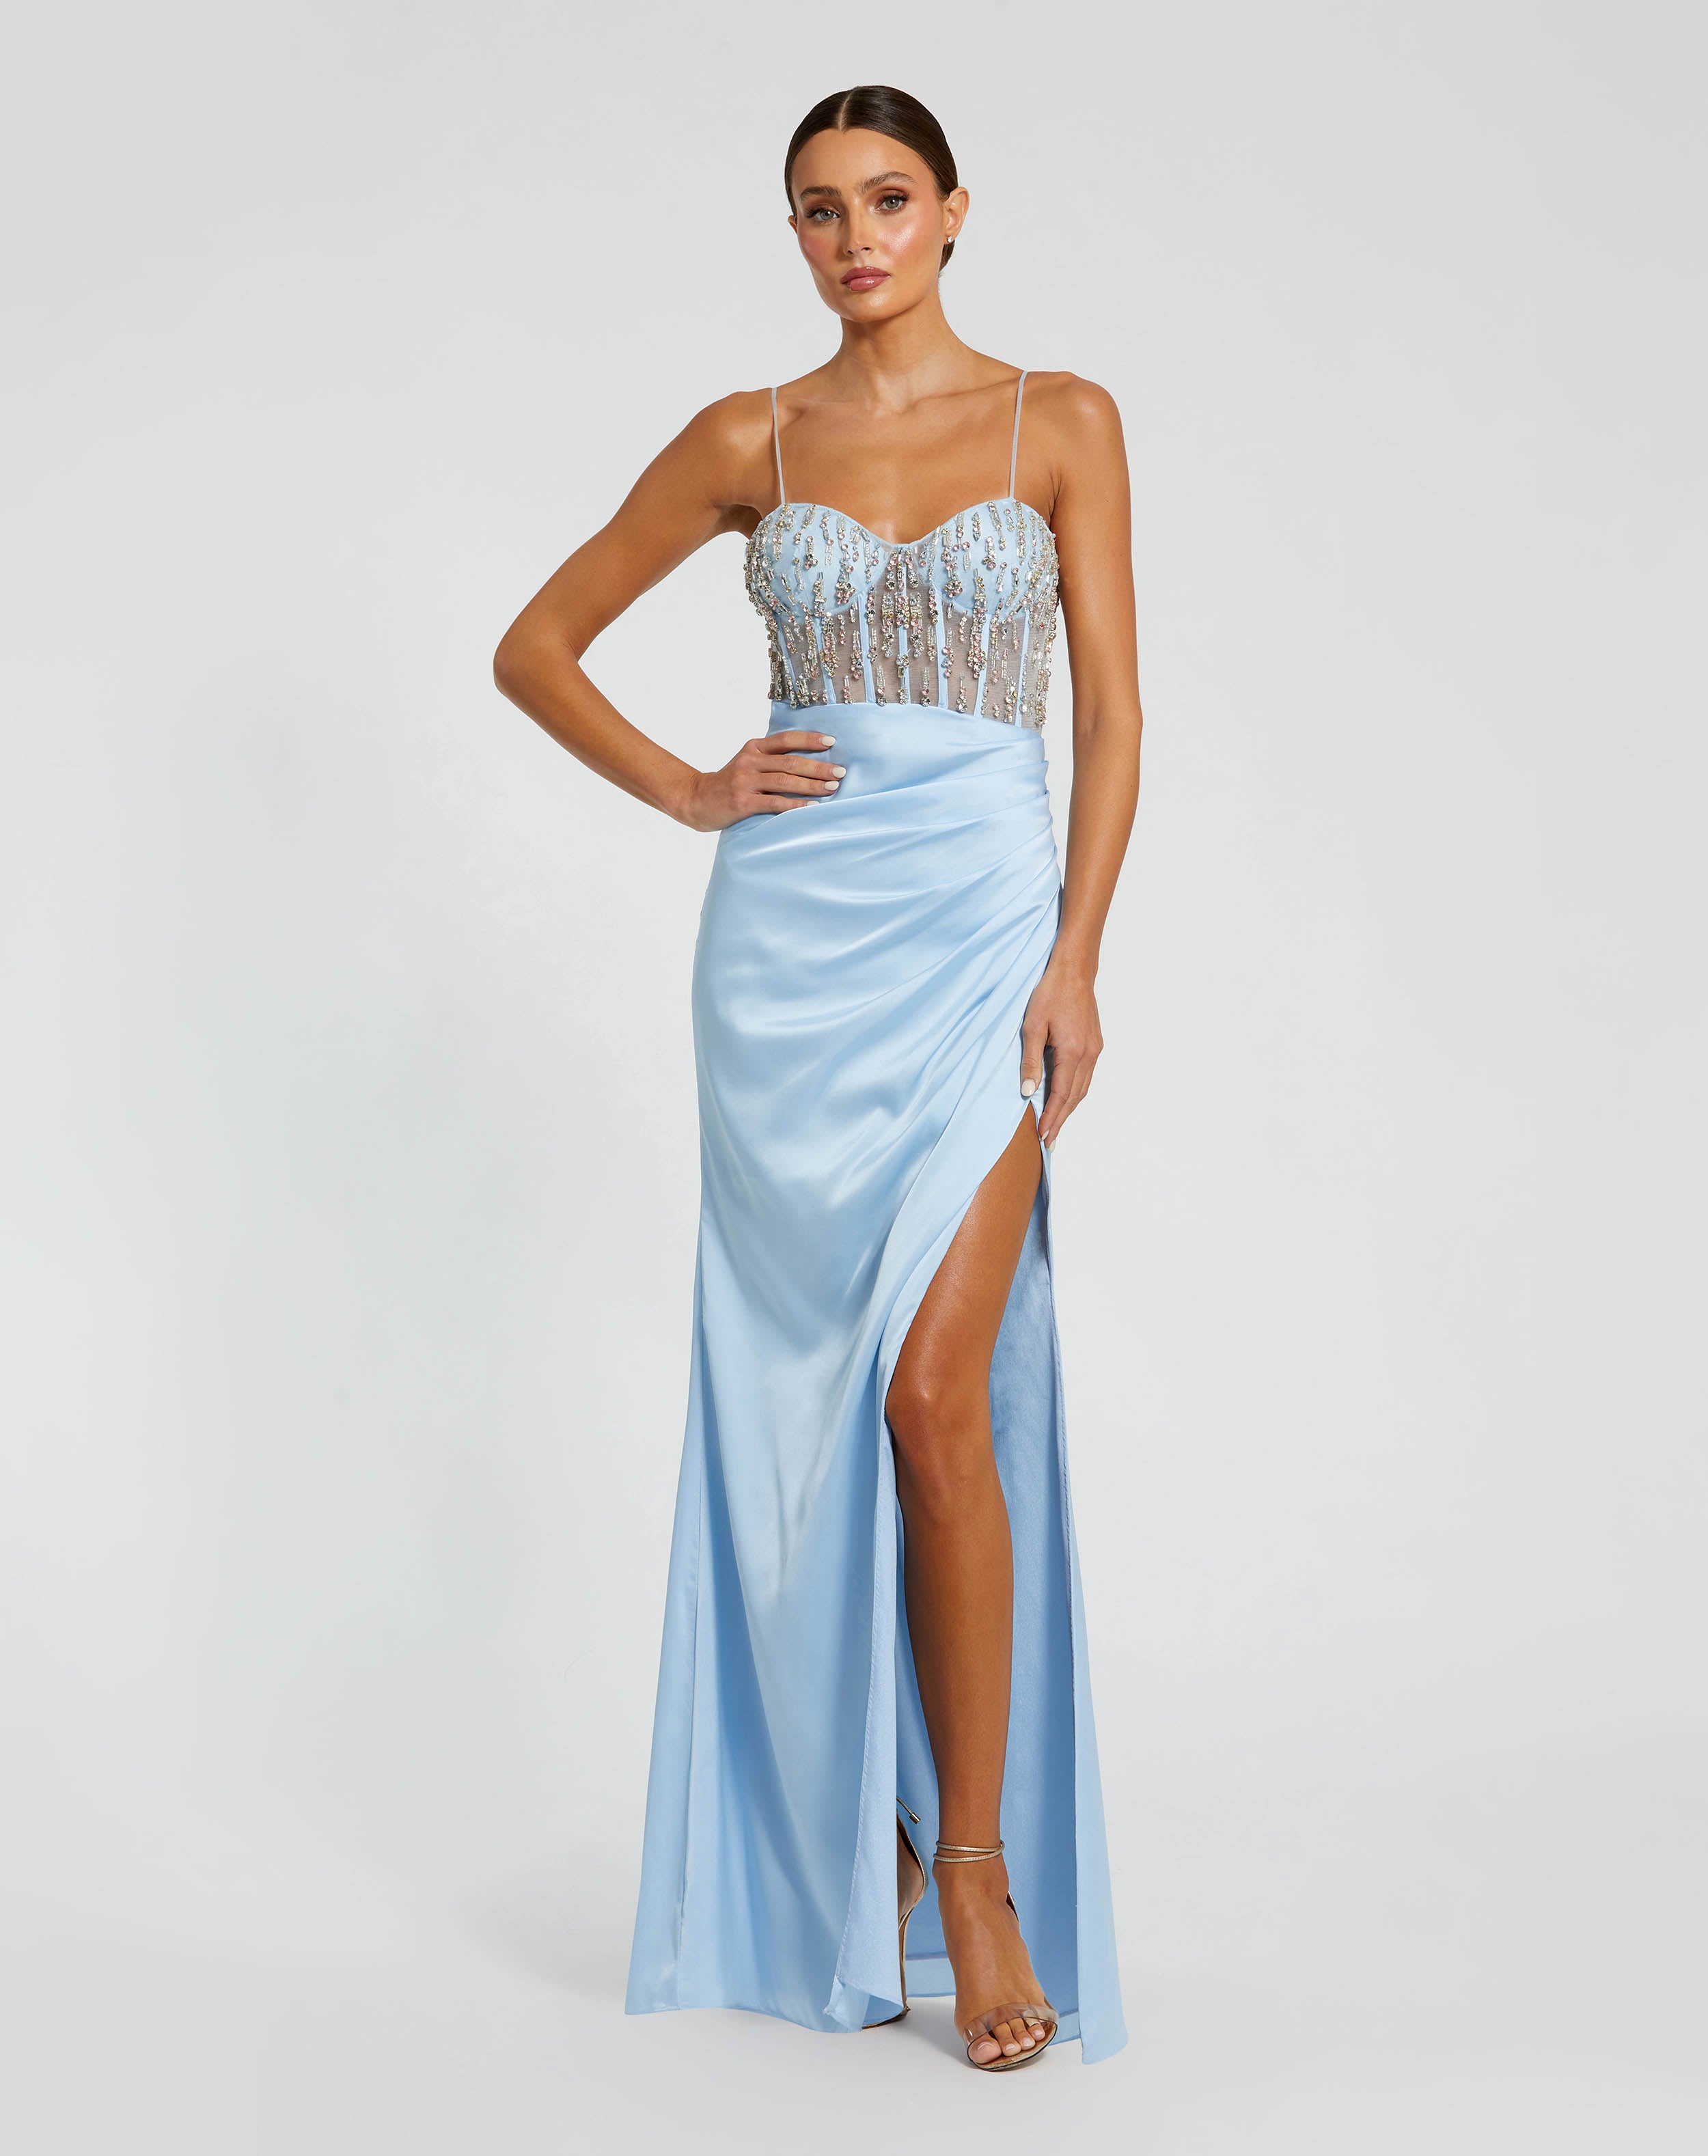 Sheer Beaded Bustier Charmeuse Gown with Slit | Sample | Sz. 2 – Mac Duggal